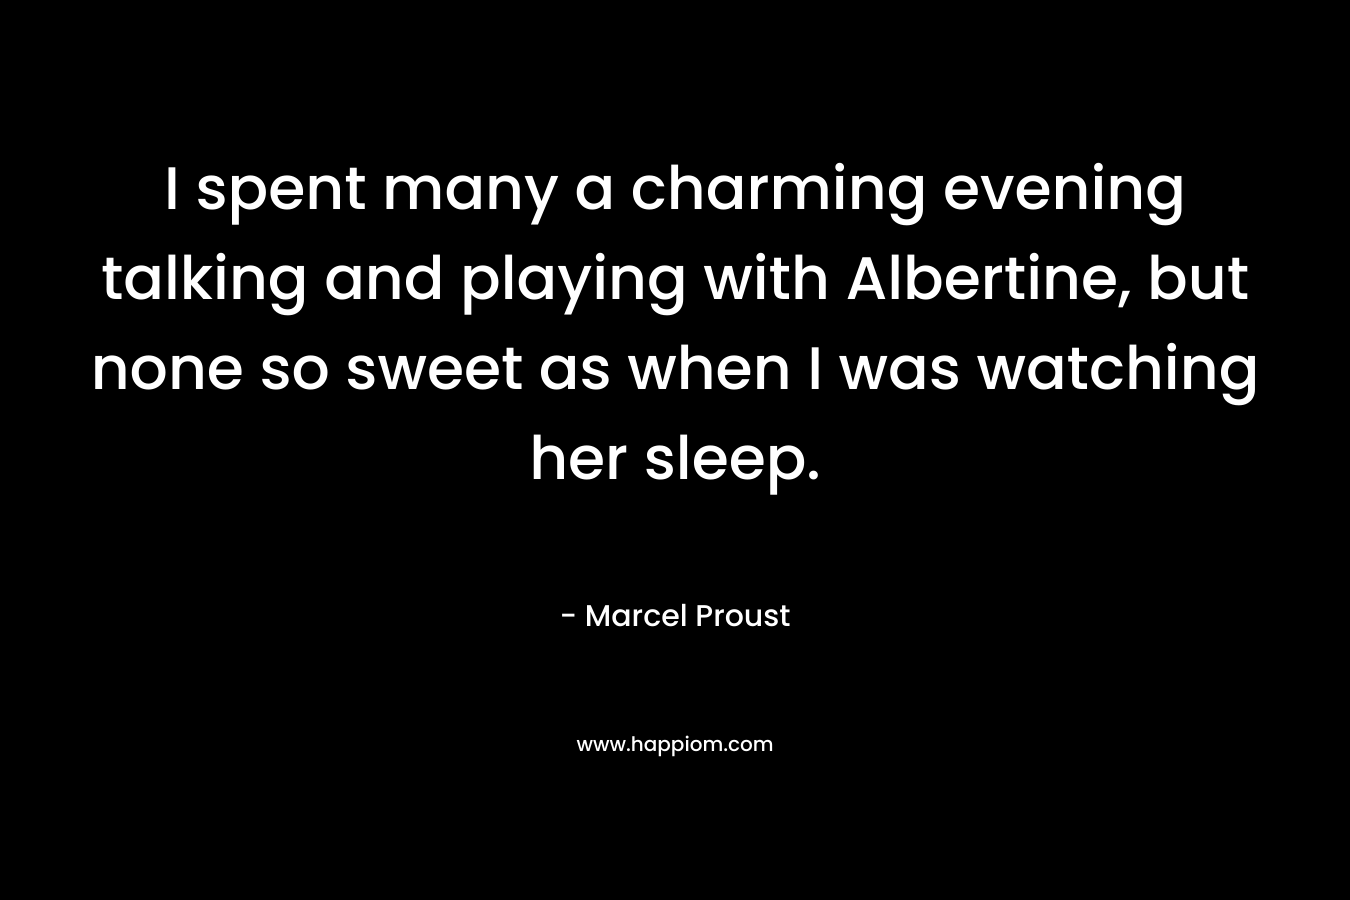 I spent many a charming evening talking and playing with Albertine, but none so sweet as when I was watching her sleep.